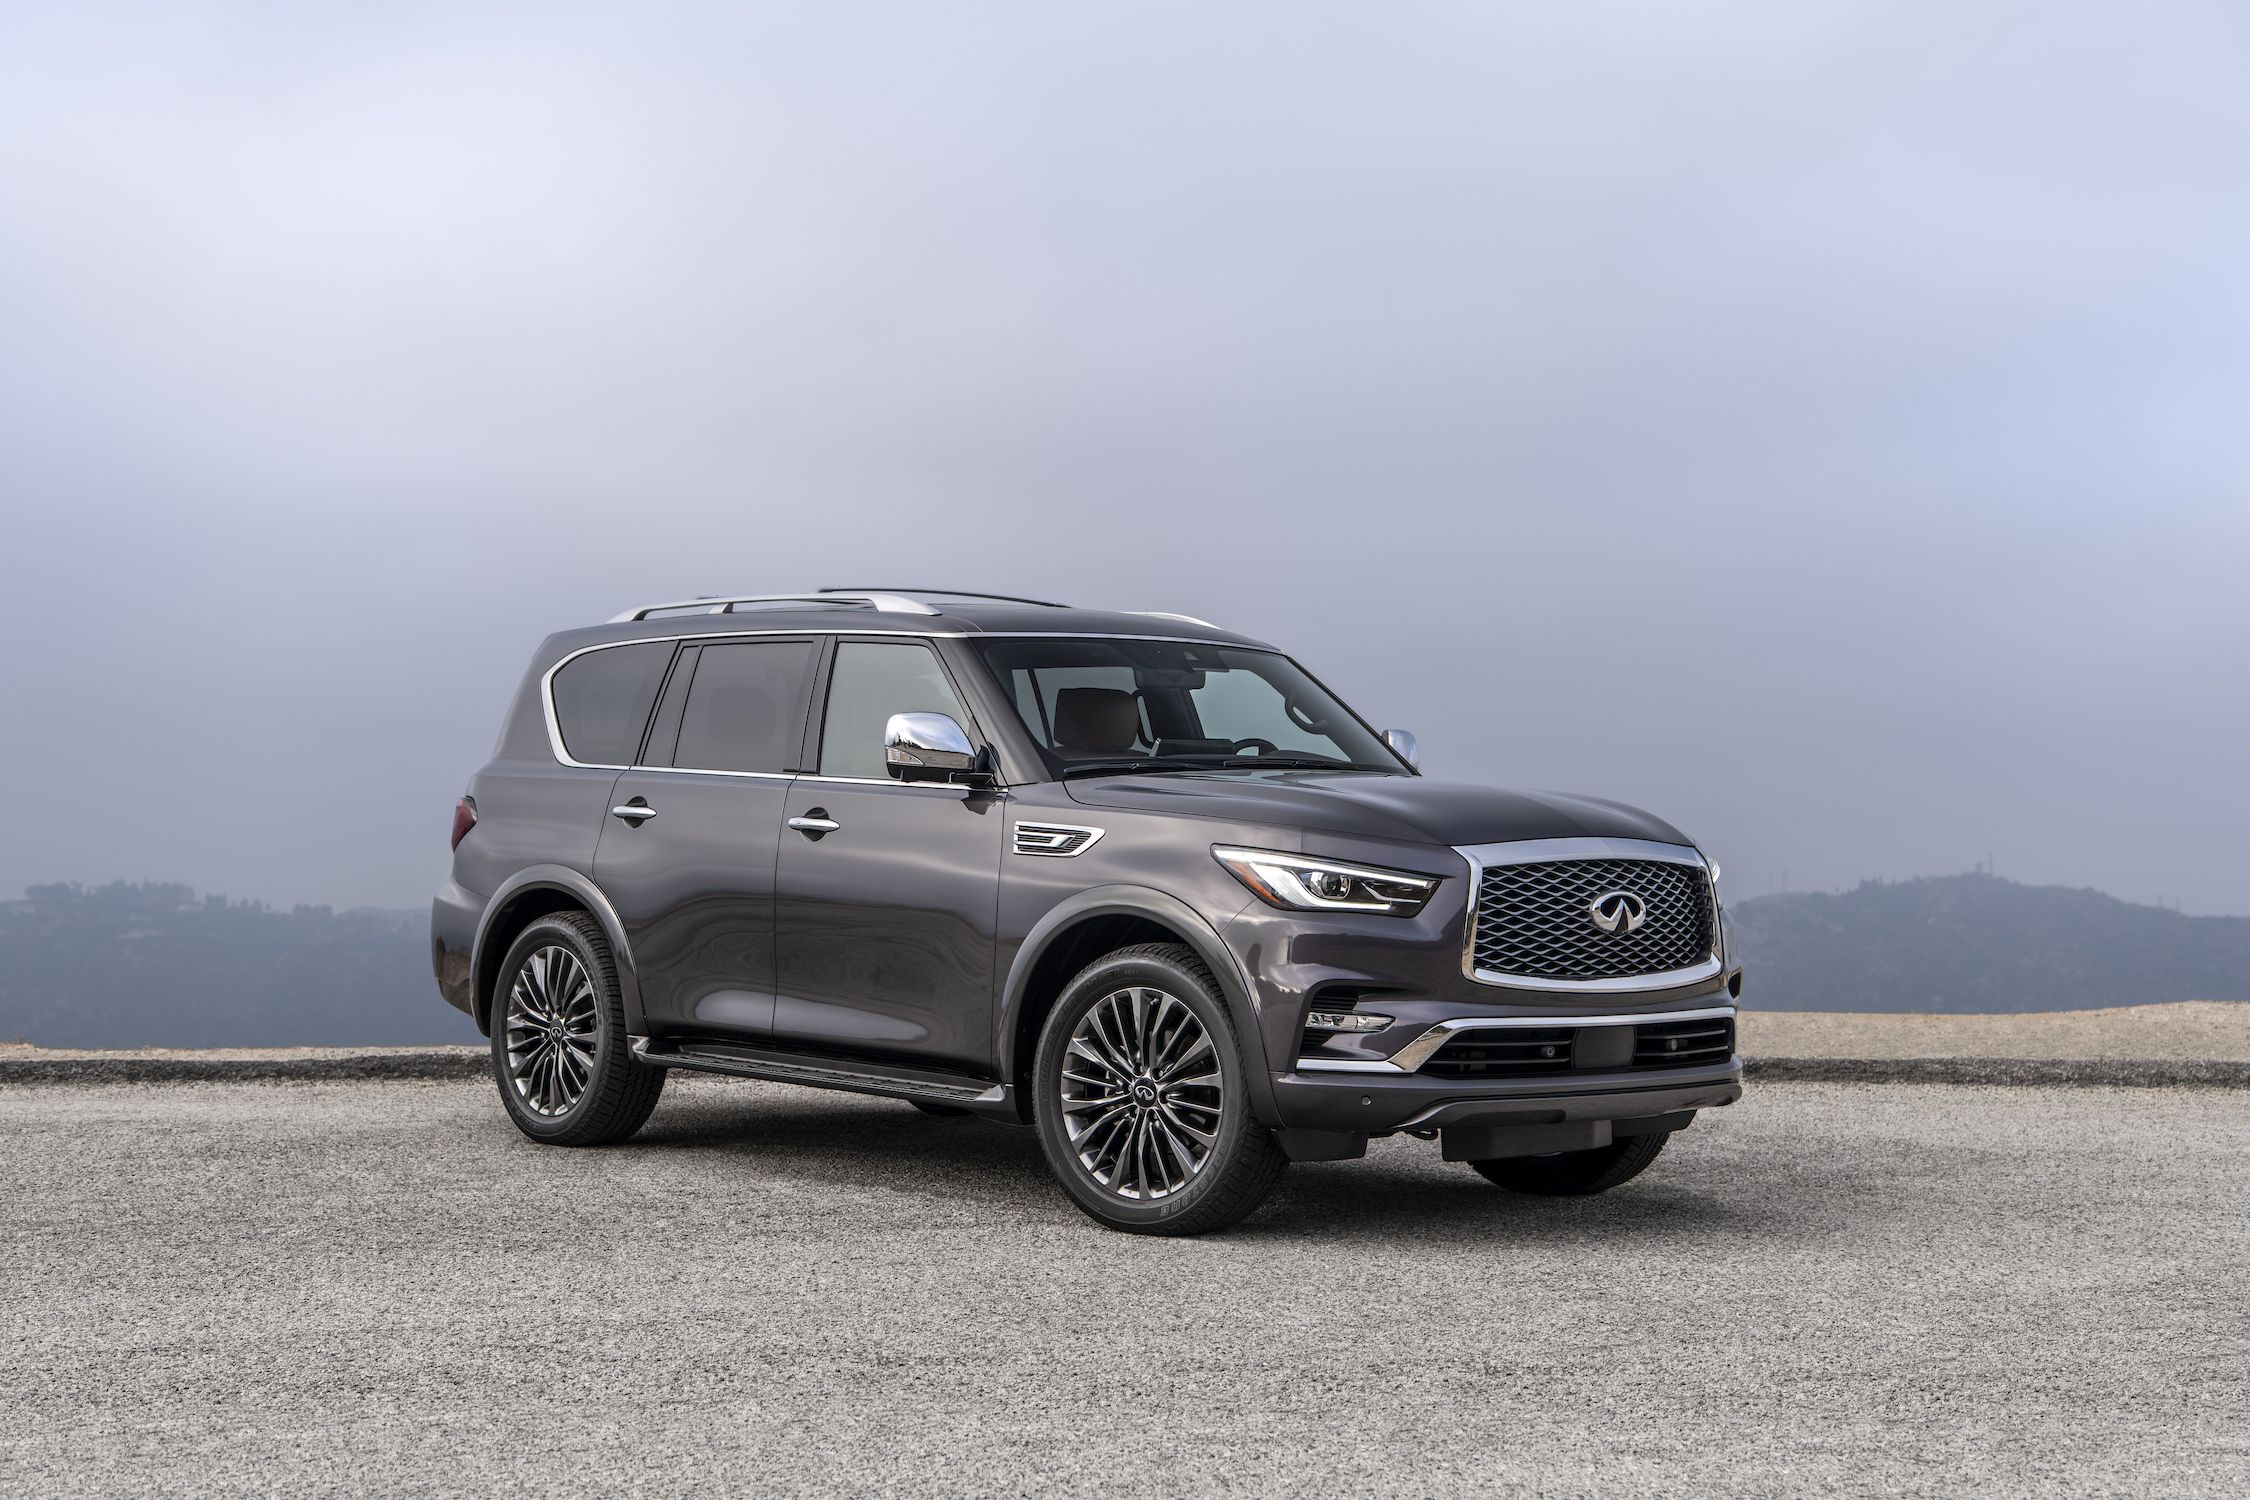 Infiniti Cars and SUVs: Reviews, Pricing, and Specs